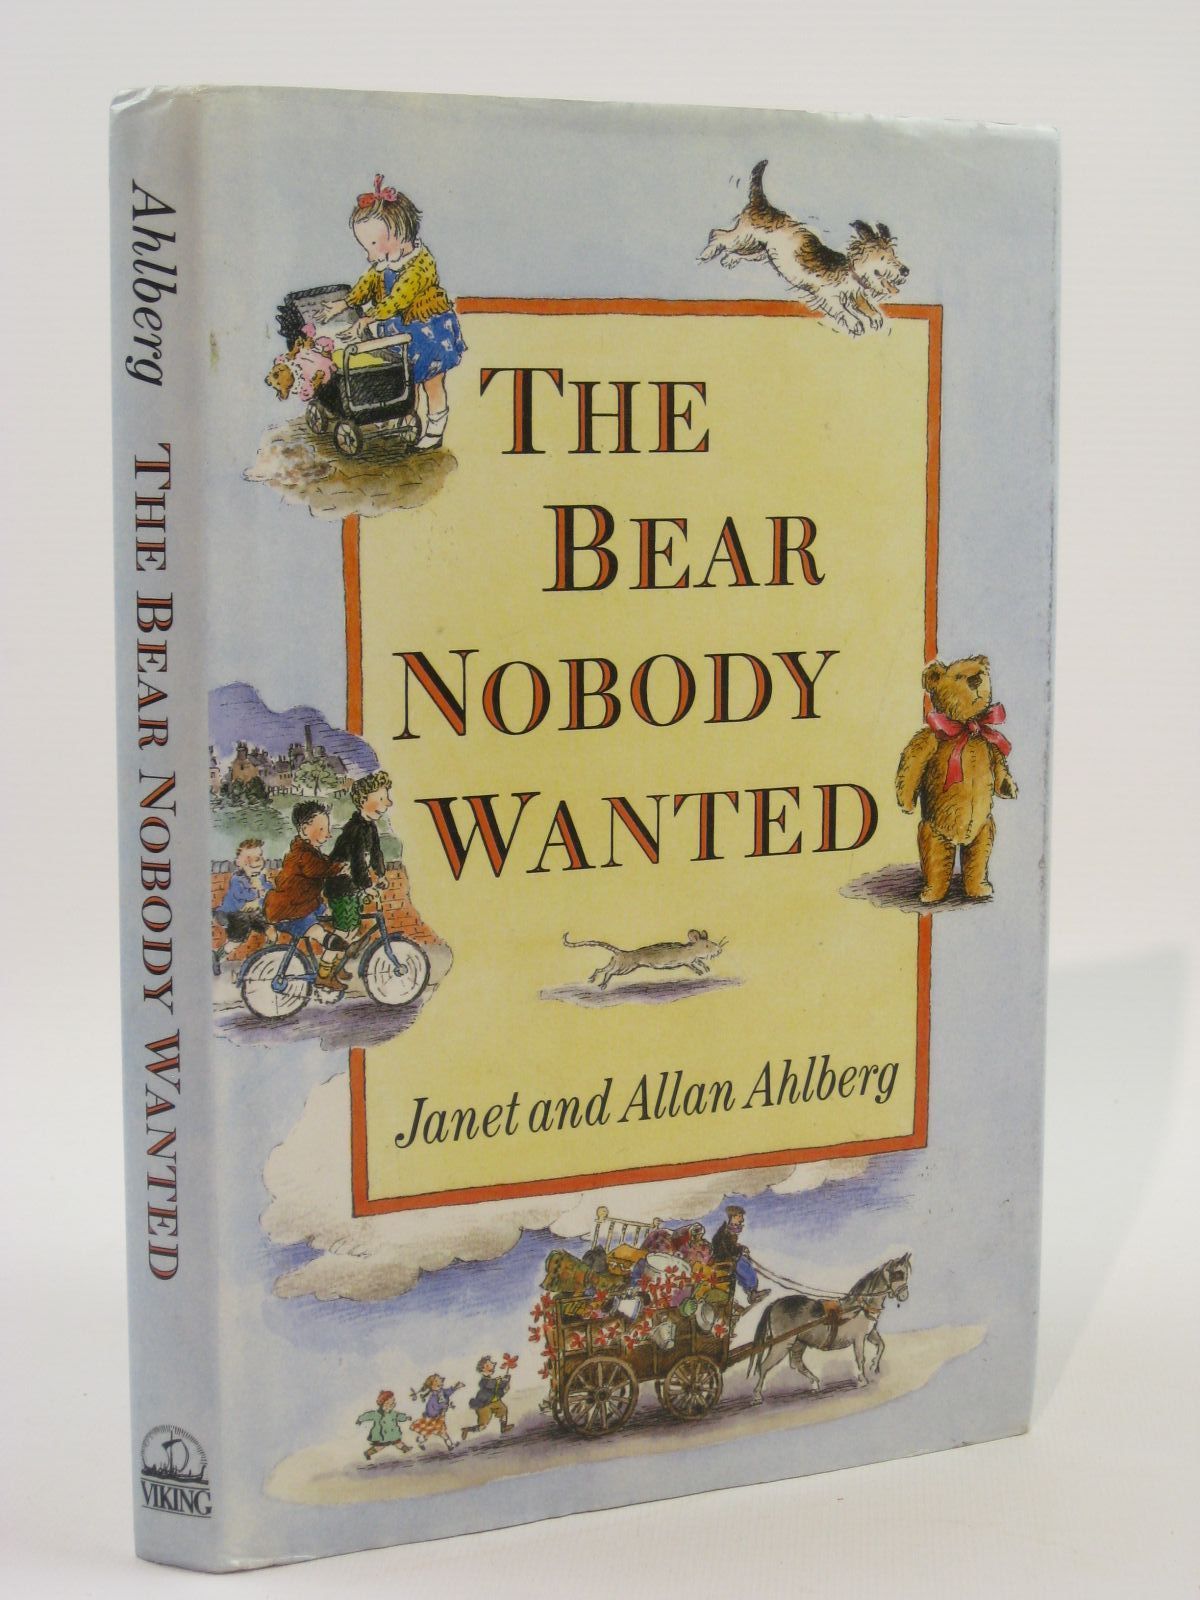 Photo of THE BEAR NOBODY WANTED written by Ahlberg, Allan illustrated by Ahlberg, Janet published by Viking (STOCK CODE: 1507579)  for sale by Stella & Rose's Books